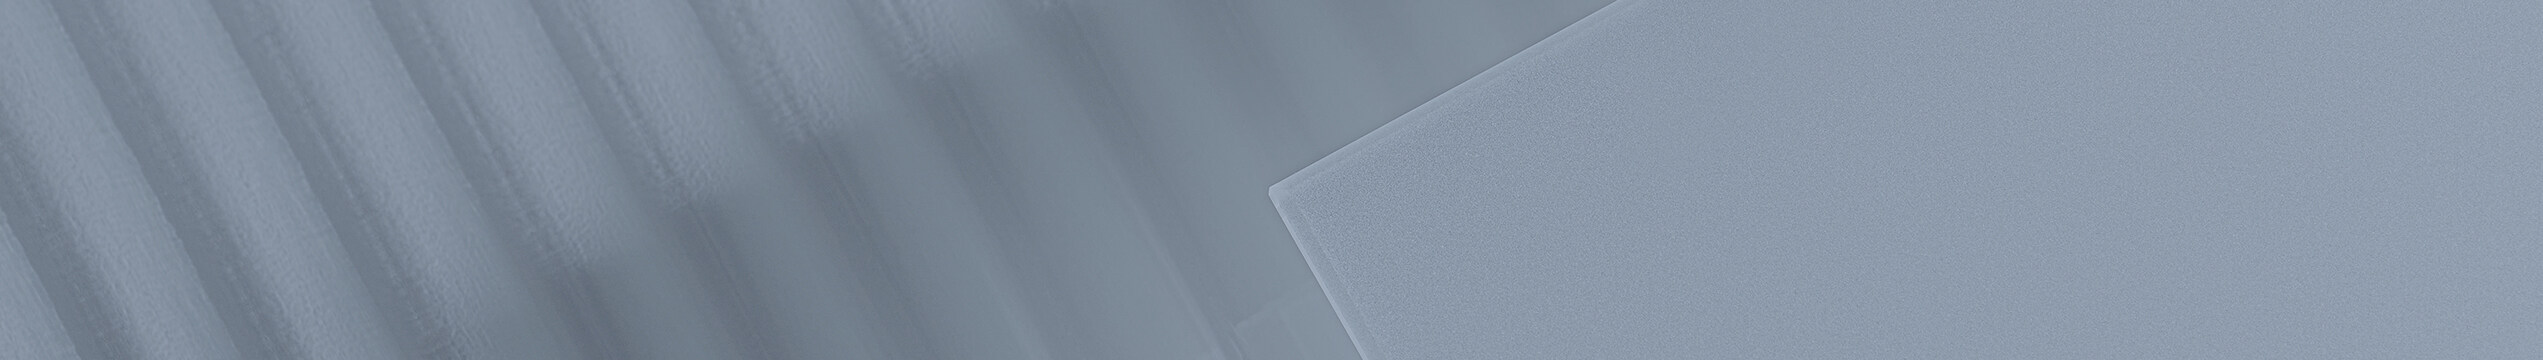 polycarbonate embossed sheet manufacturers